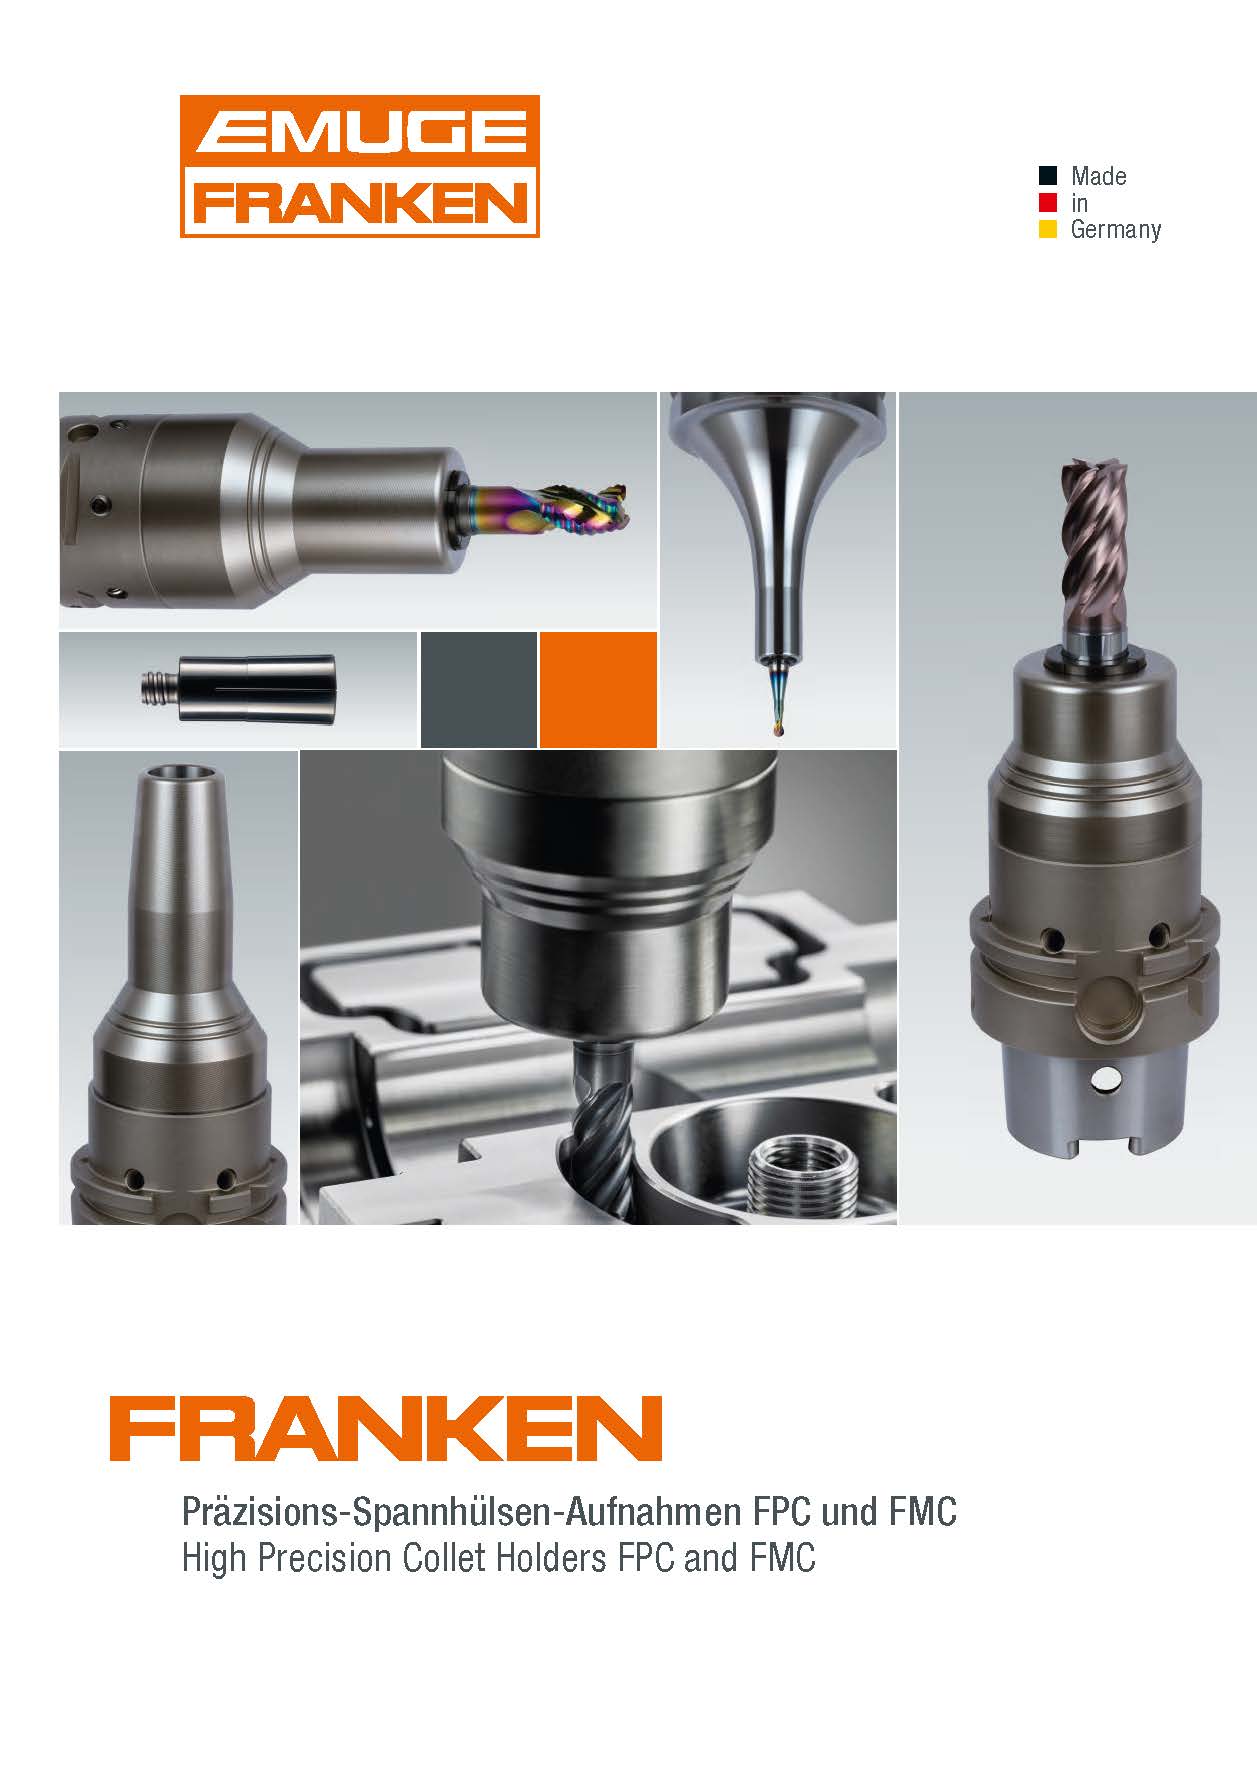 High precision collet holders FPC and FMC